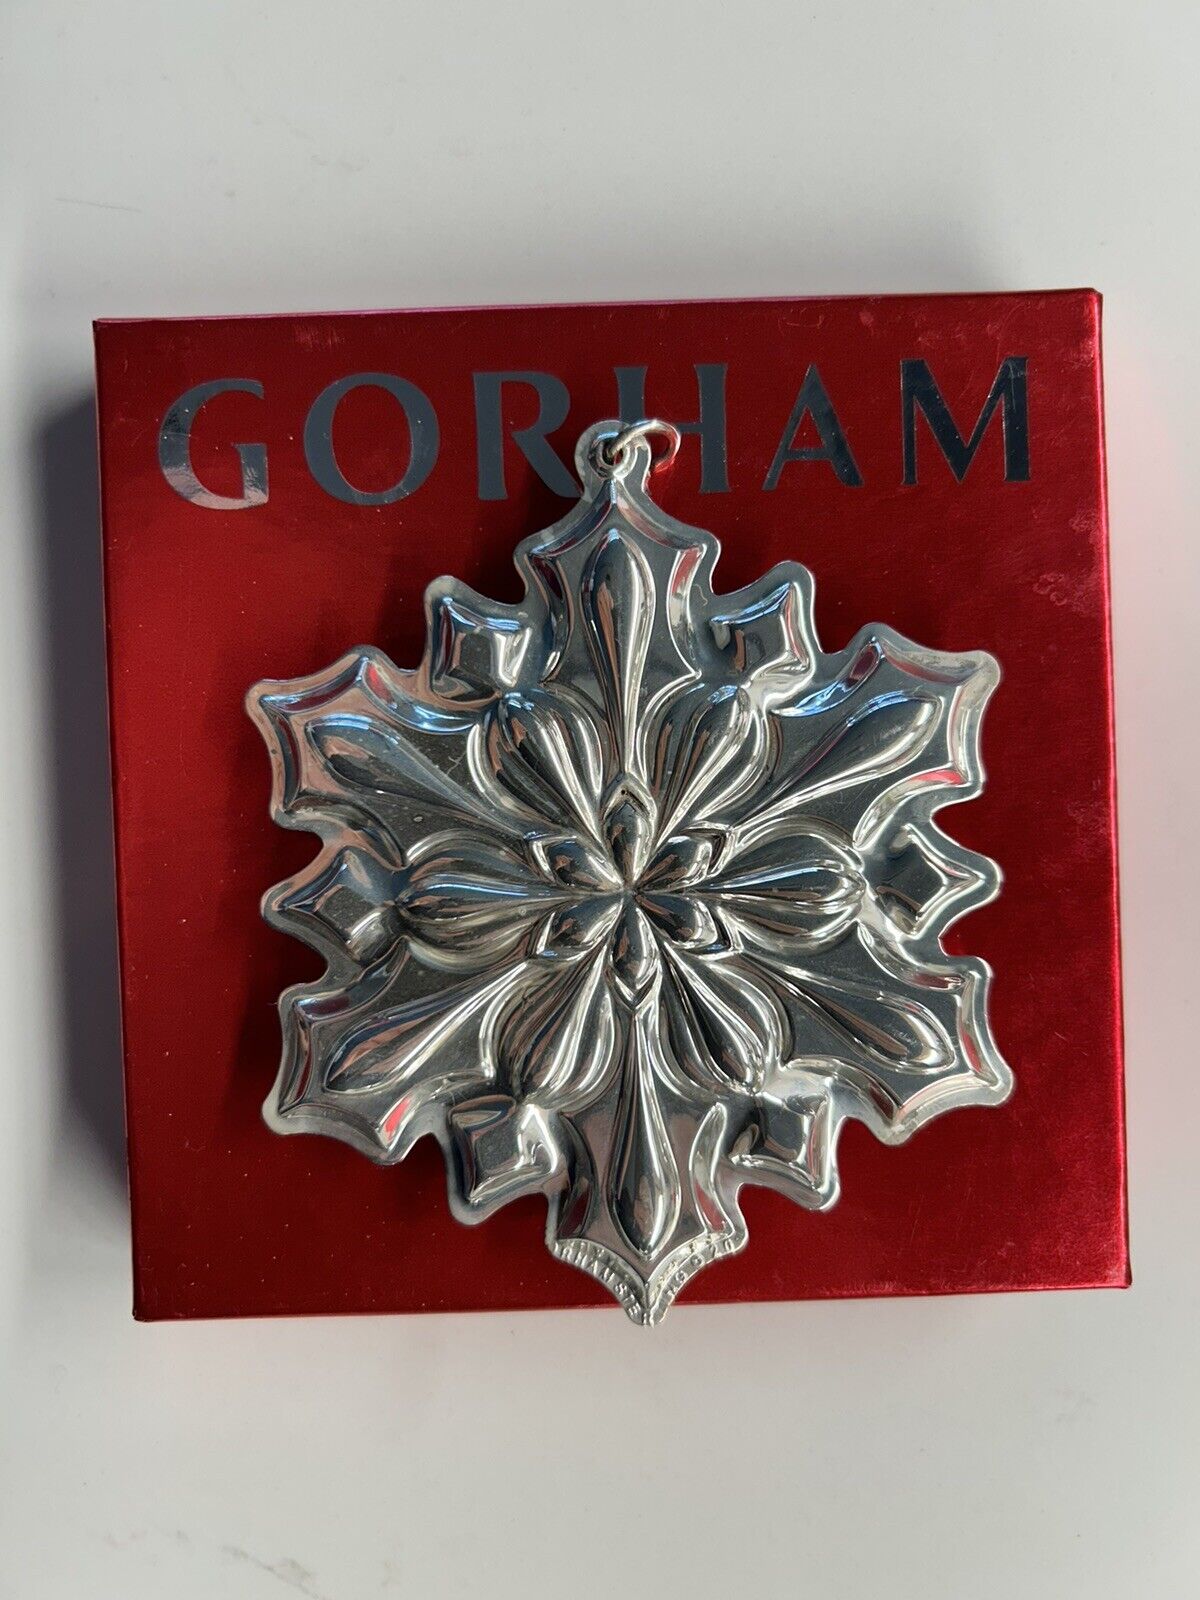 2018 Gorham STERLING Silver 49th Annual Edition Snowflake Ornament RARE Year